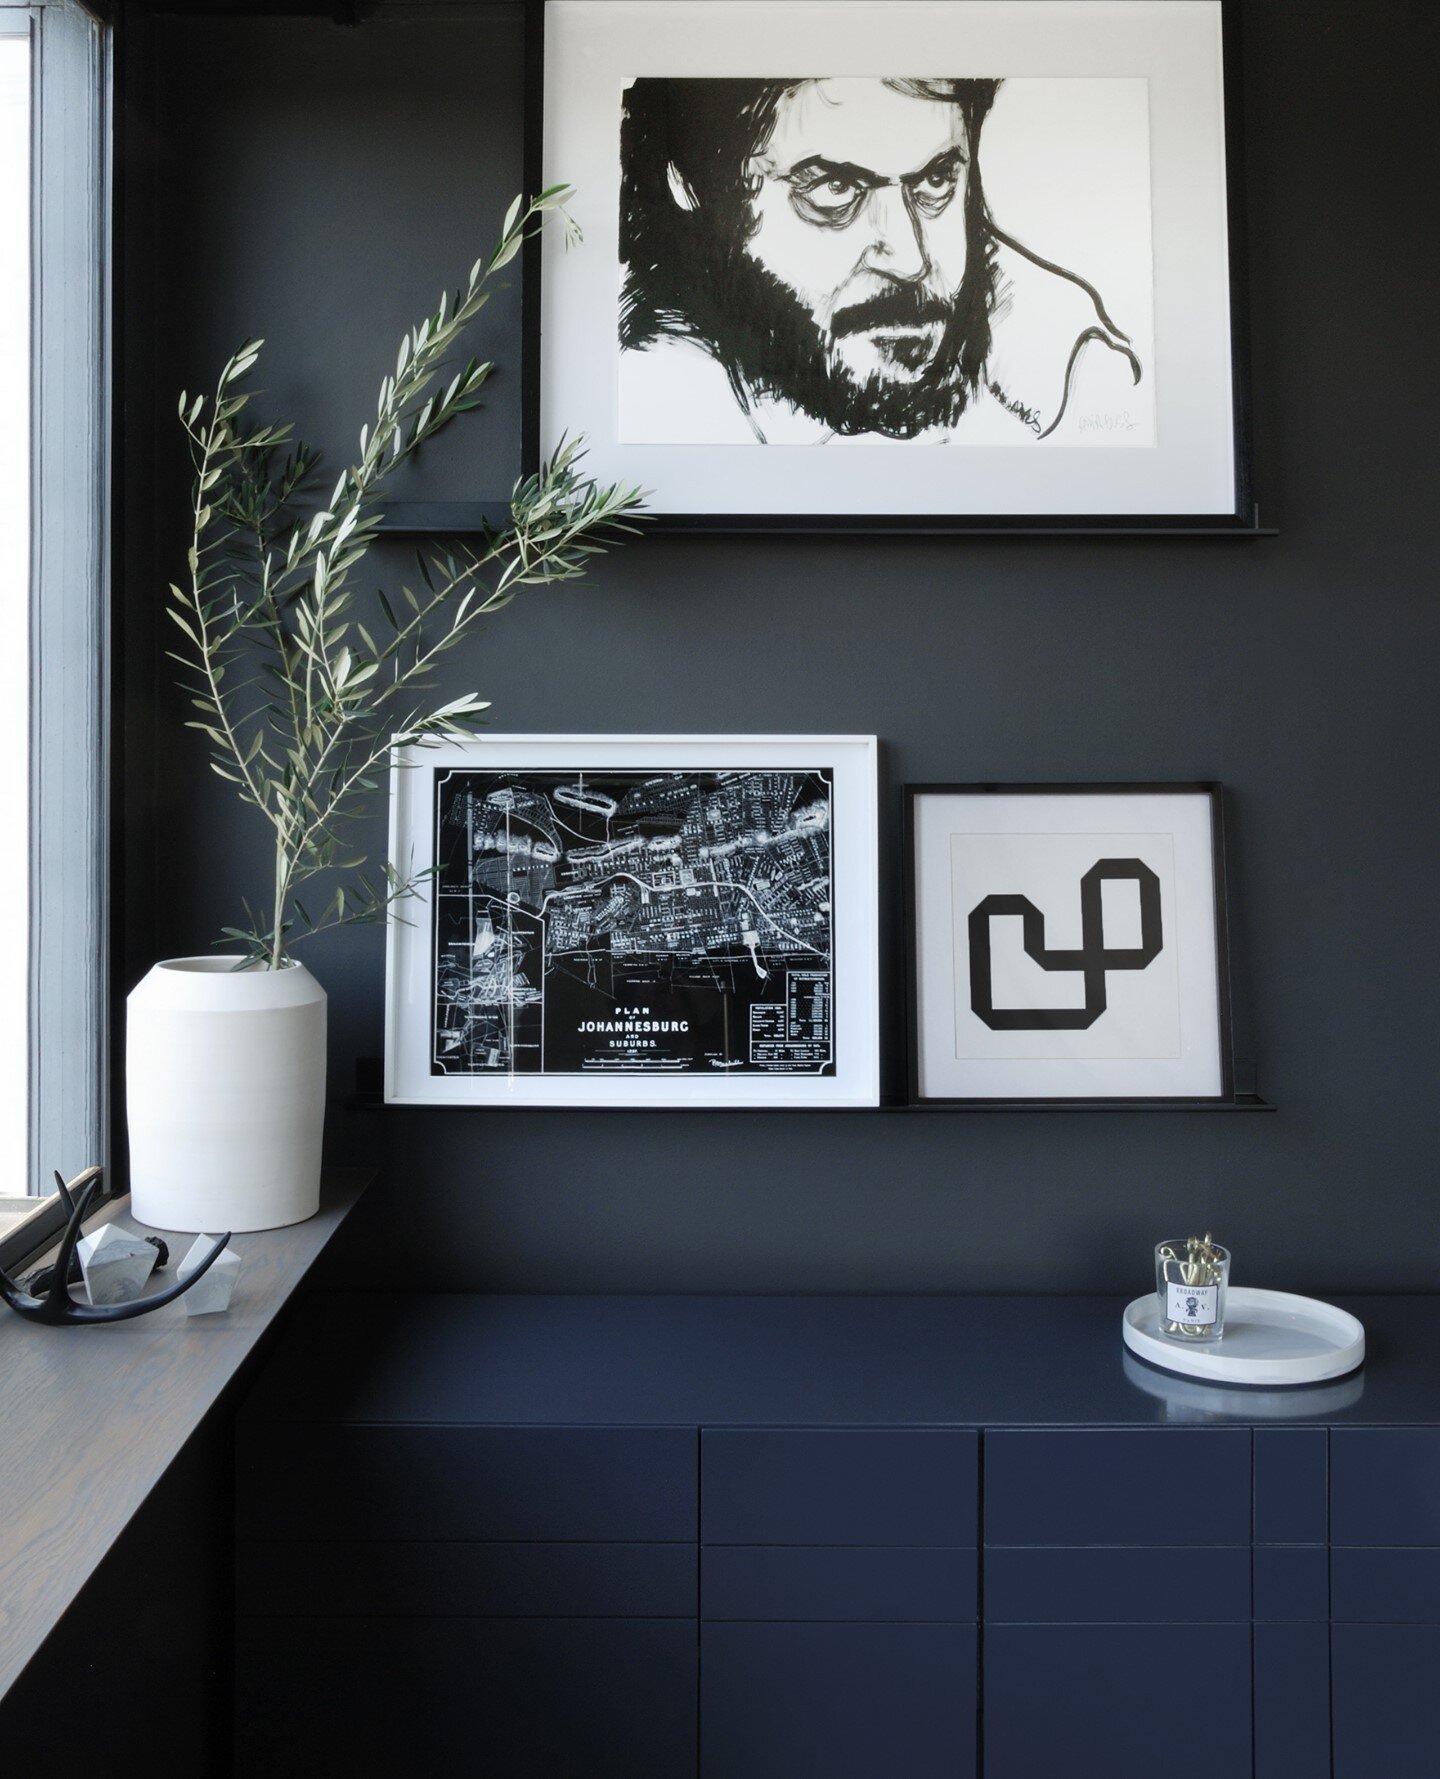 Extending an olive branch.. sorry we have been MIA the past few weeks, but we have been busy working on a very exciting project. Details to be revealed soon!⁠
⁠
In the meantime here is a moody corner elevated by bold black and white art and the E-uni